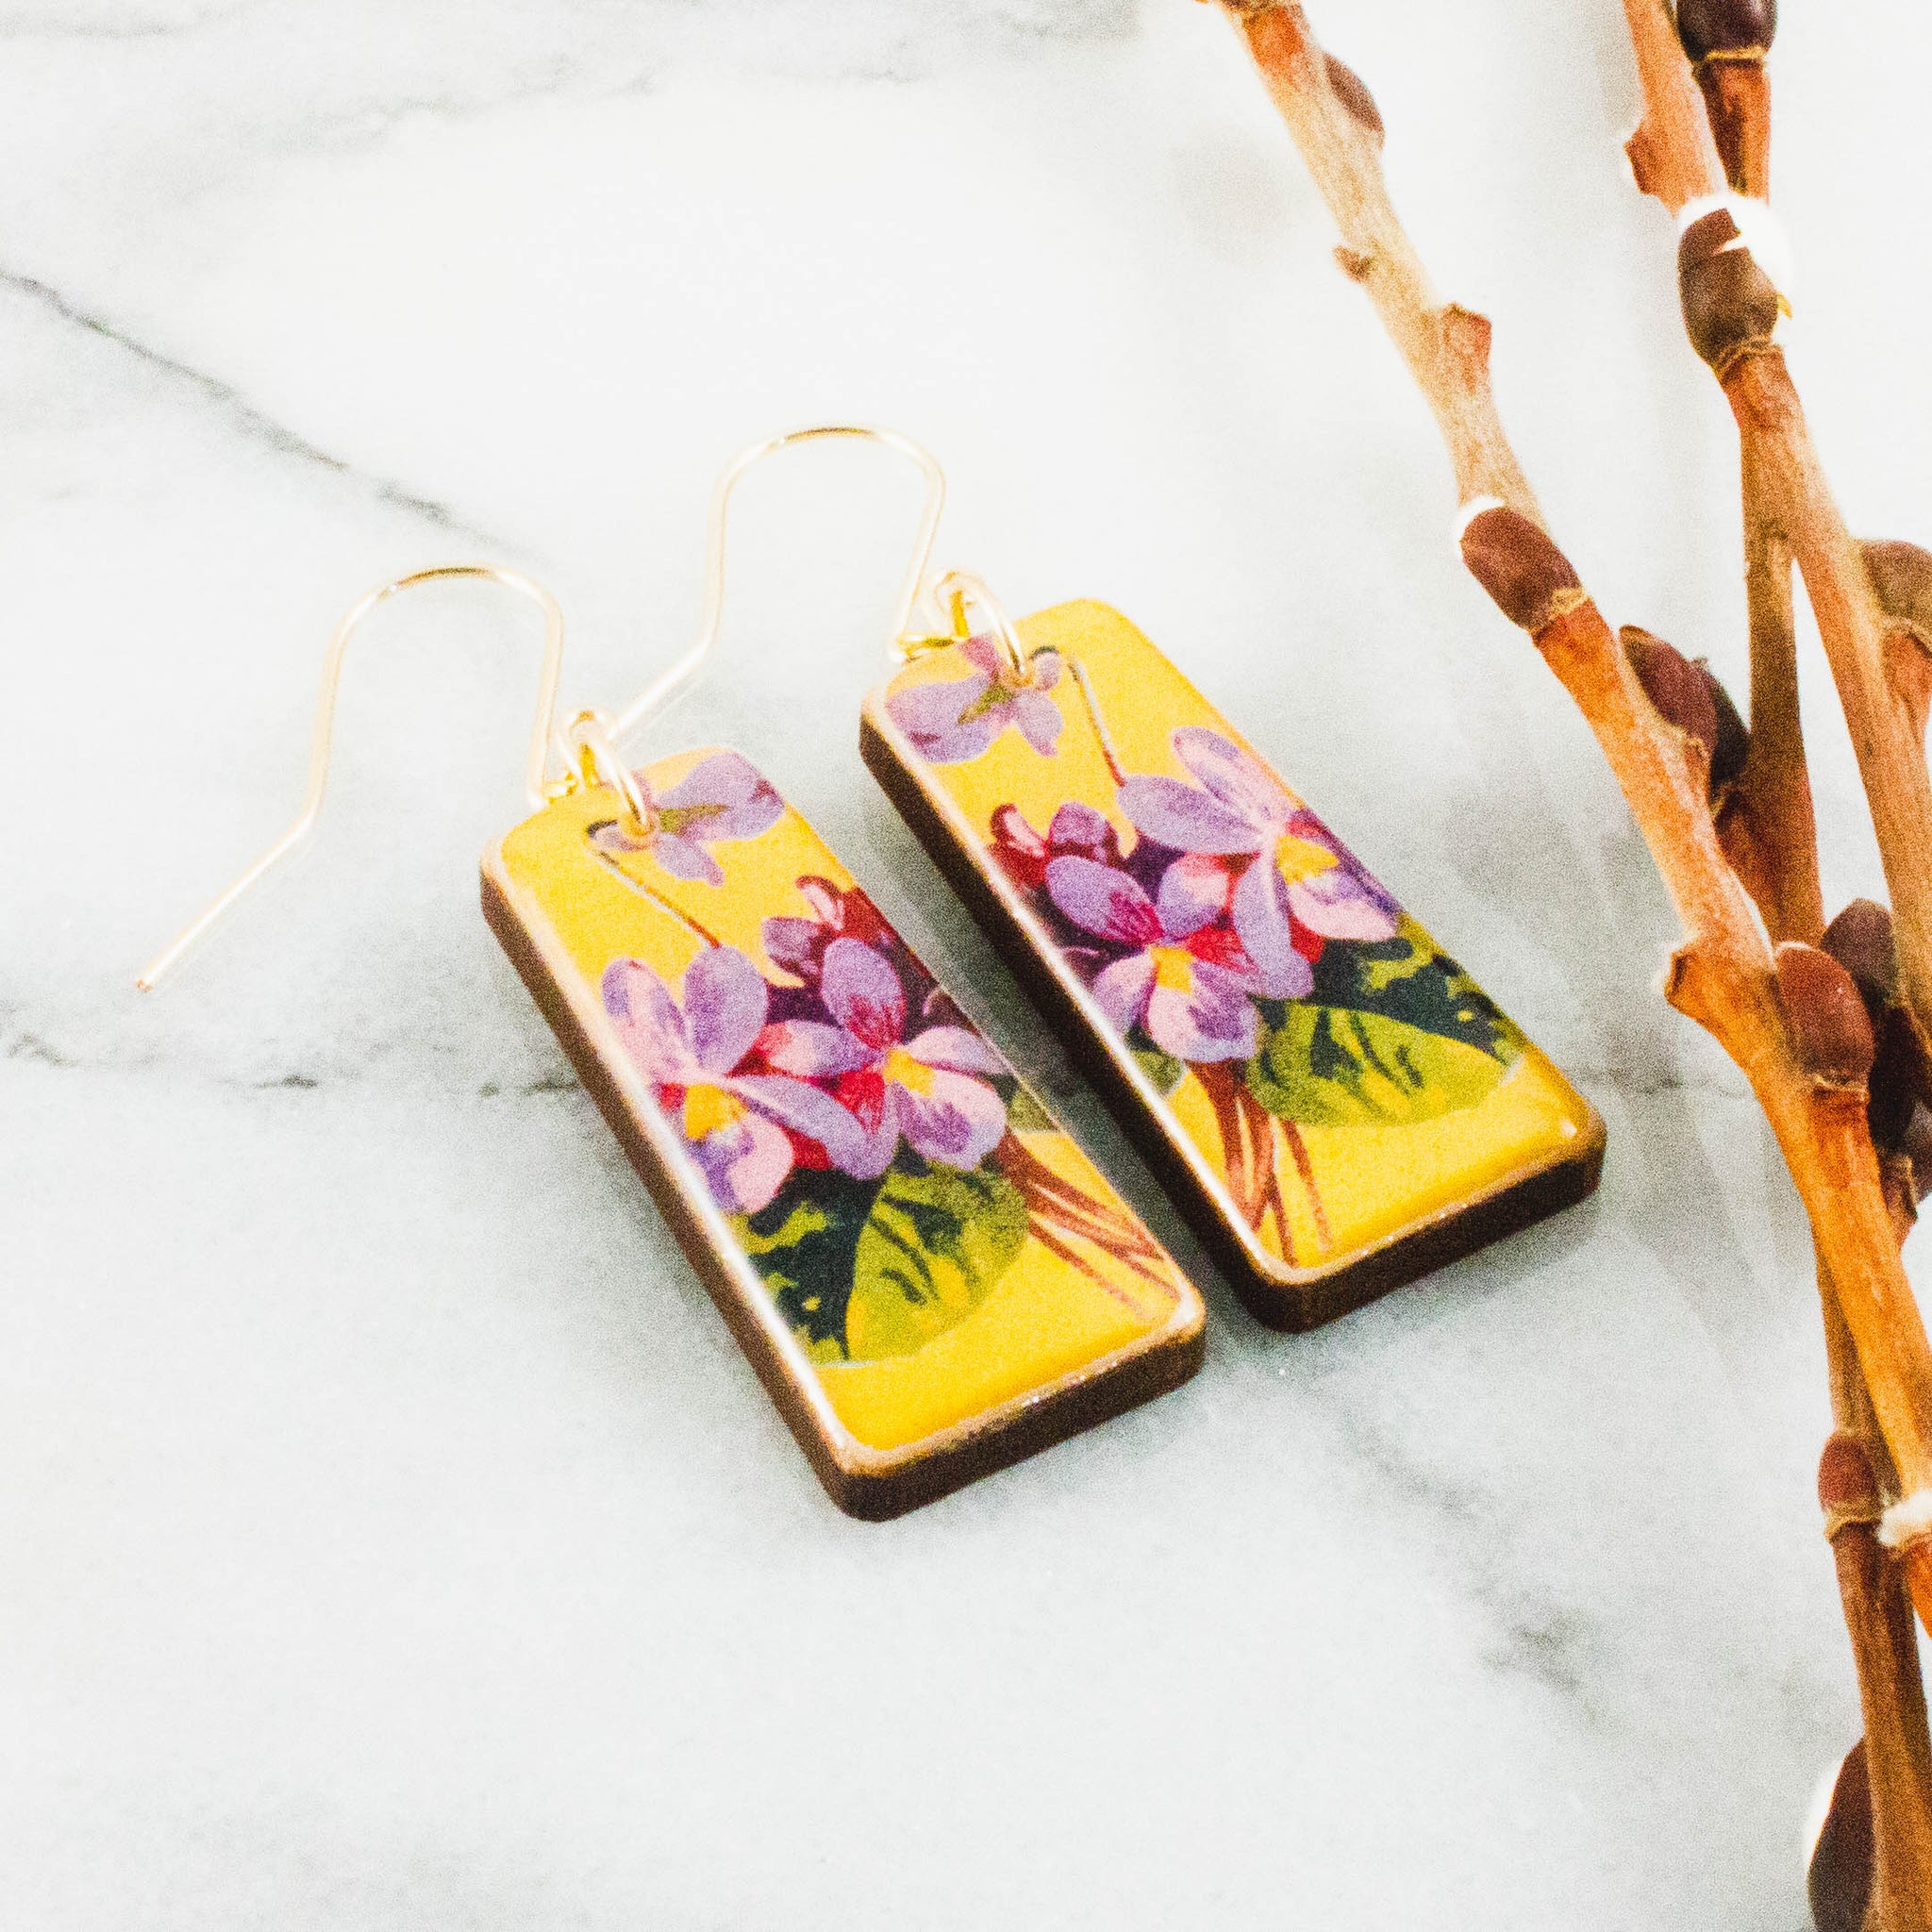 Violets Matchbook Tapered Rectangle Earrings